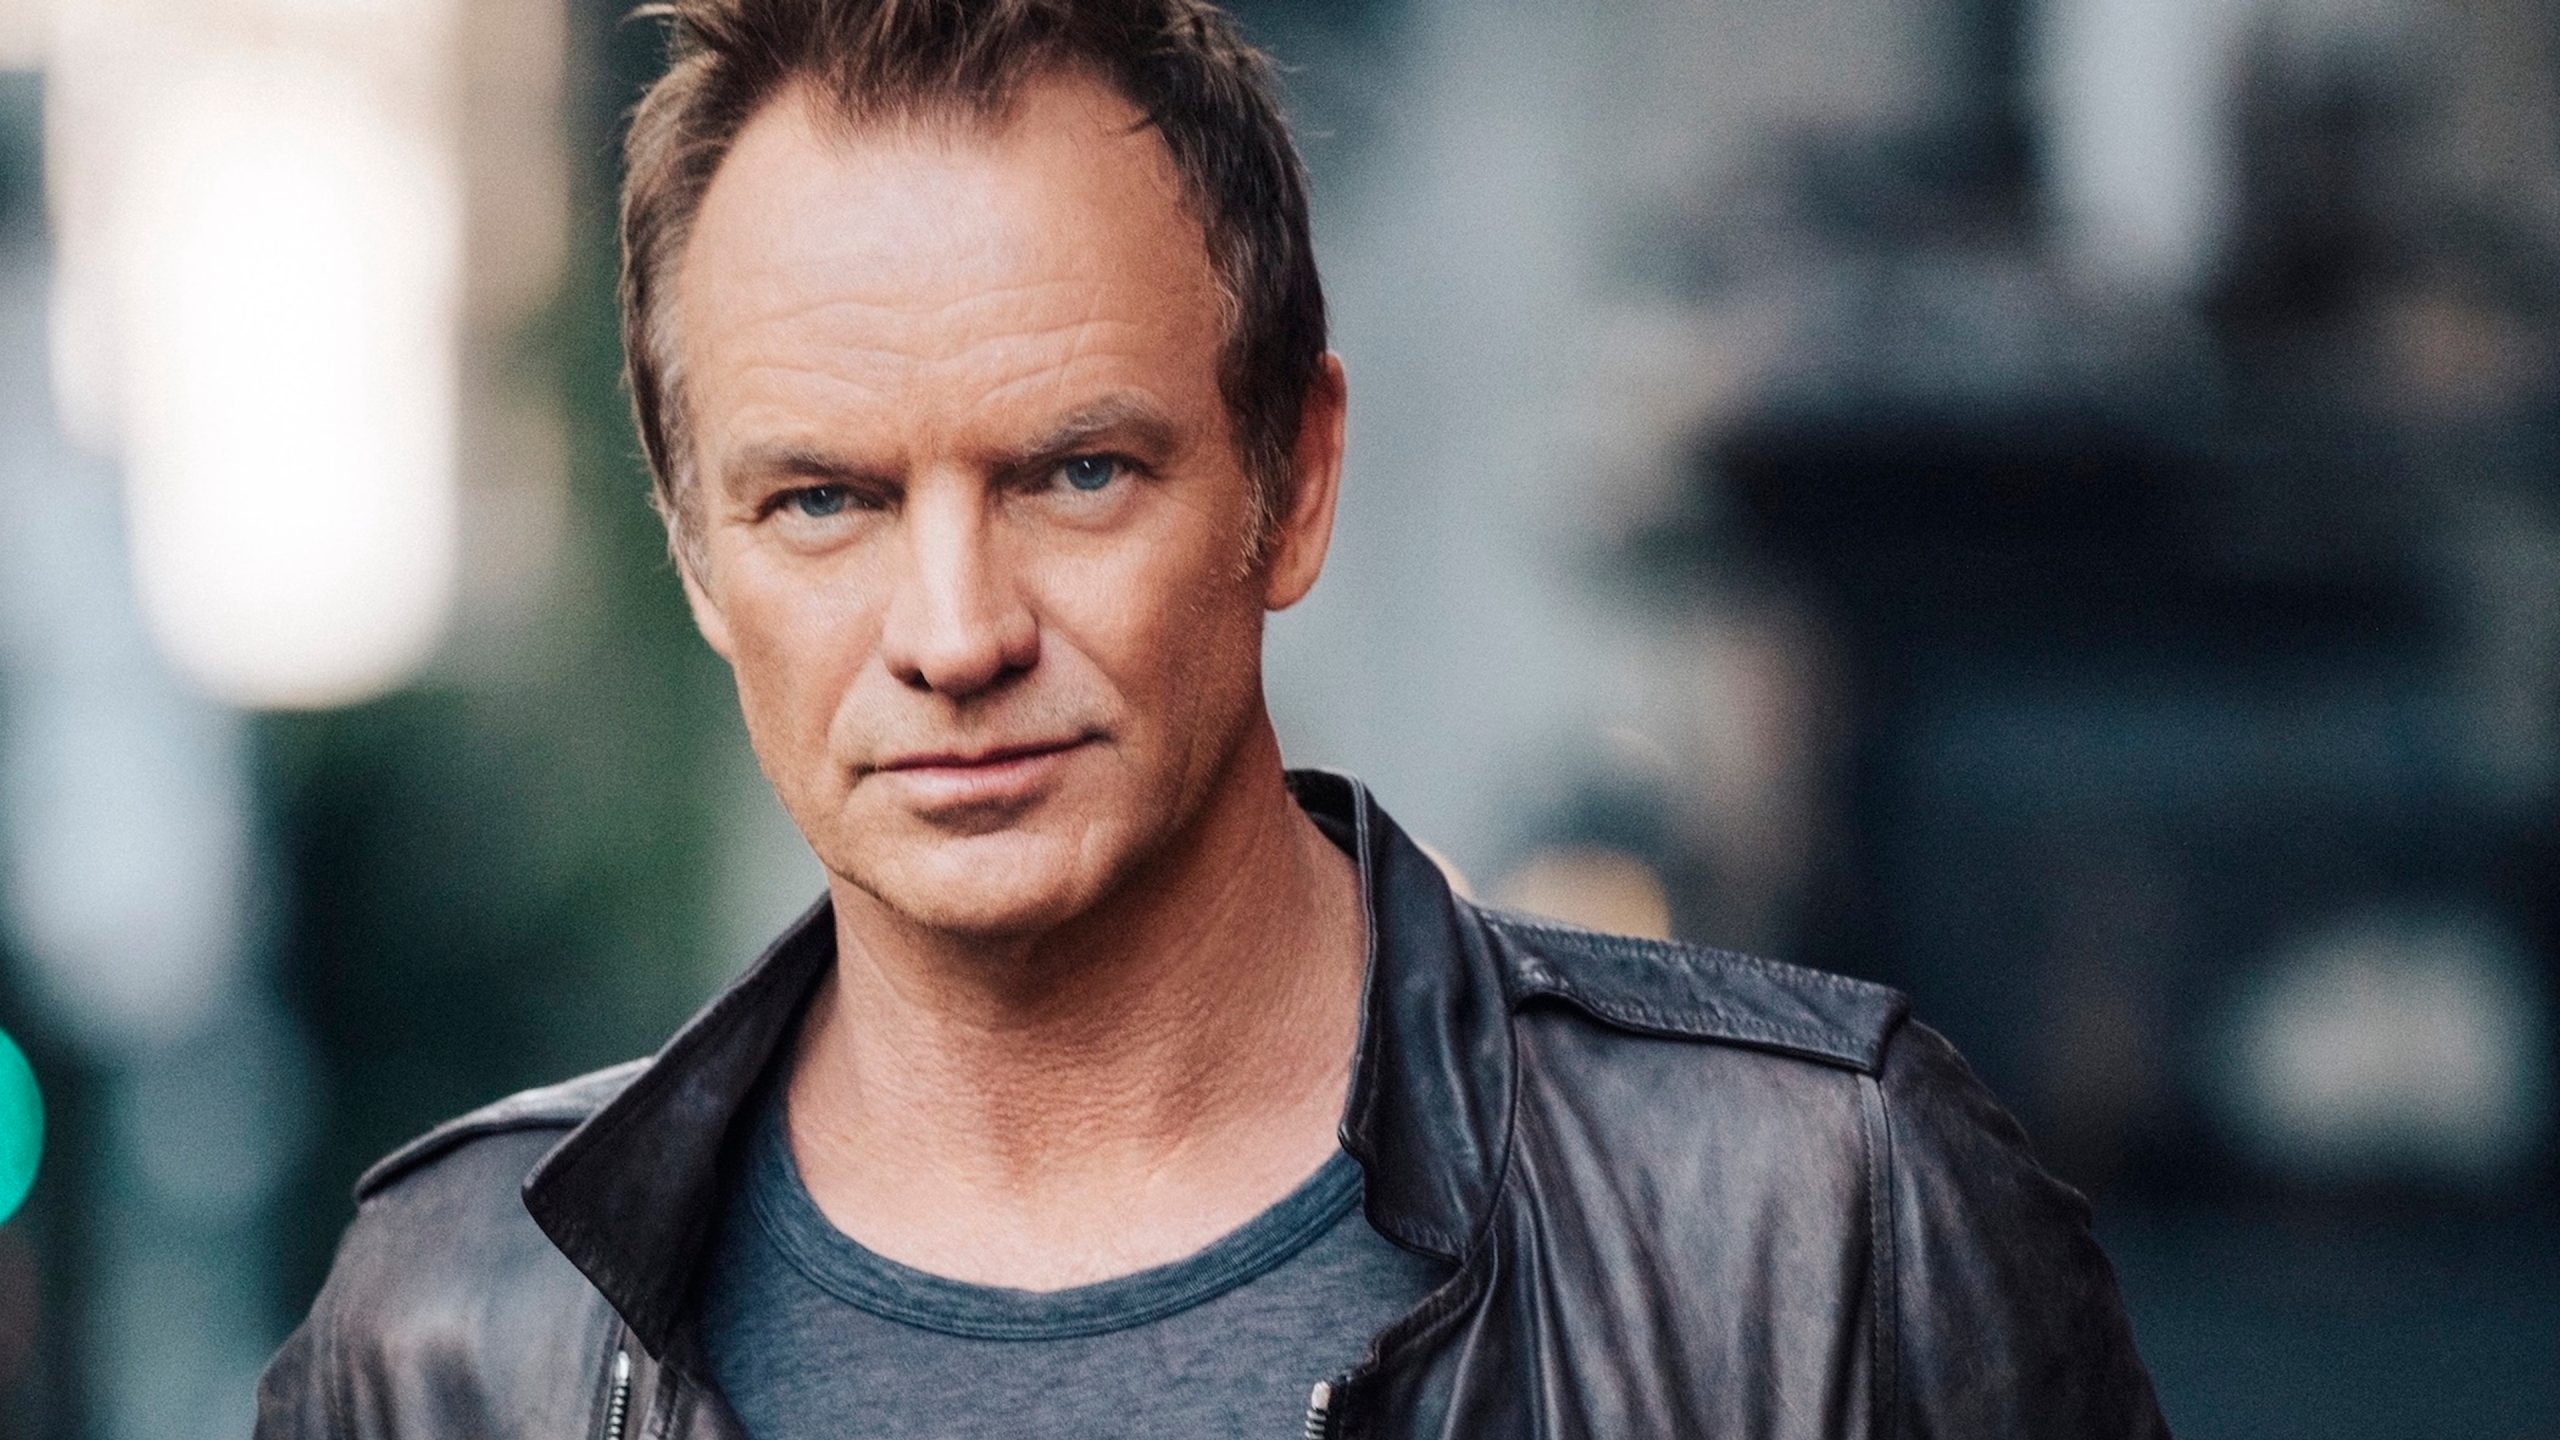 Sting top songs, Best of Sting, Iconic tracks, The Artistree ranking, 2560x1440 HD Desktop